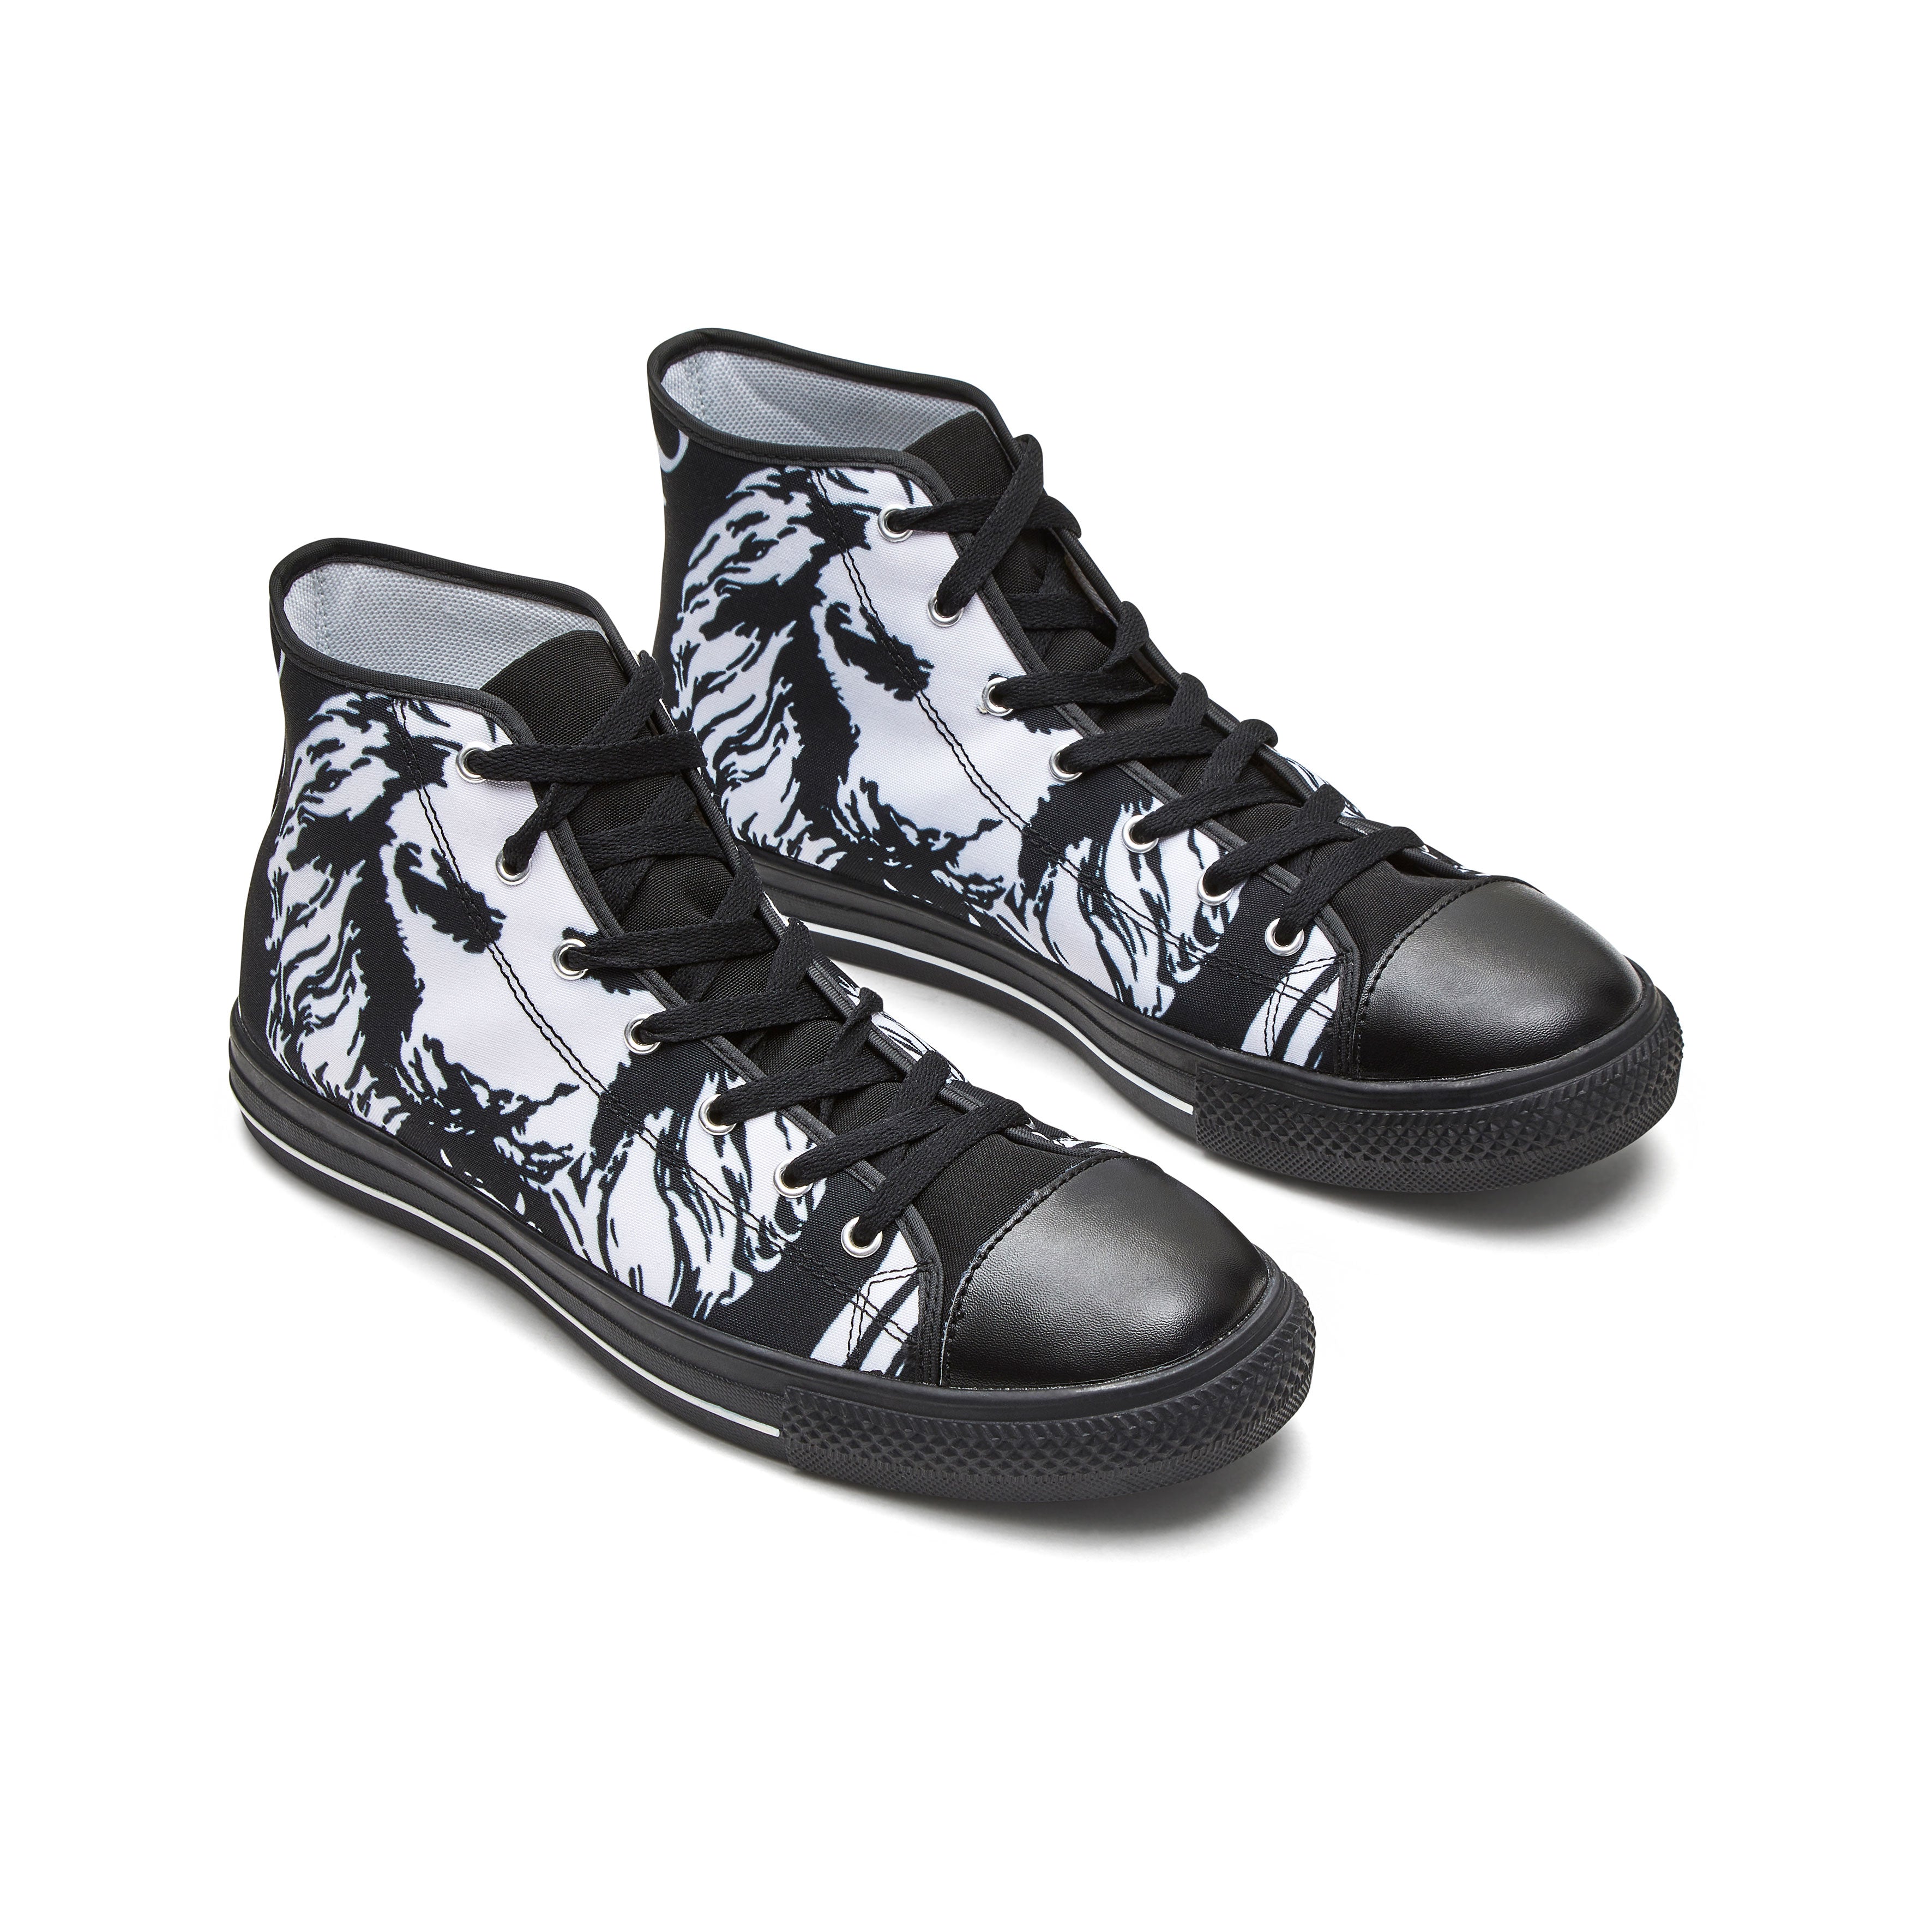 NFA_No-Fixed-Abode-Sneakers-trainer-shoes-Black-lion-premium-london-streetwear-skater-hitops